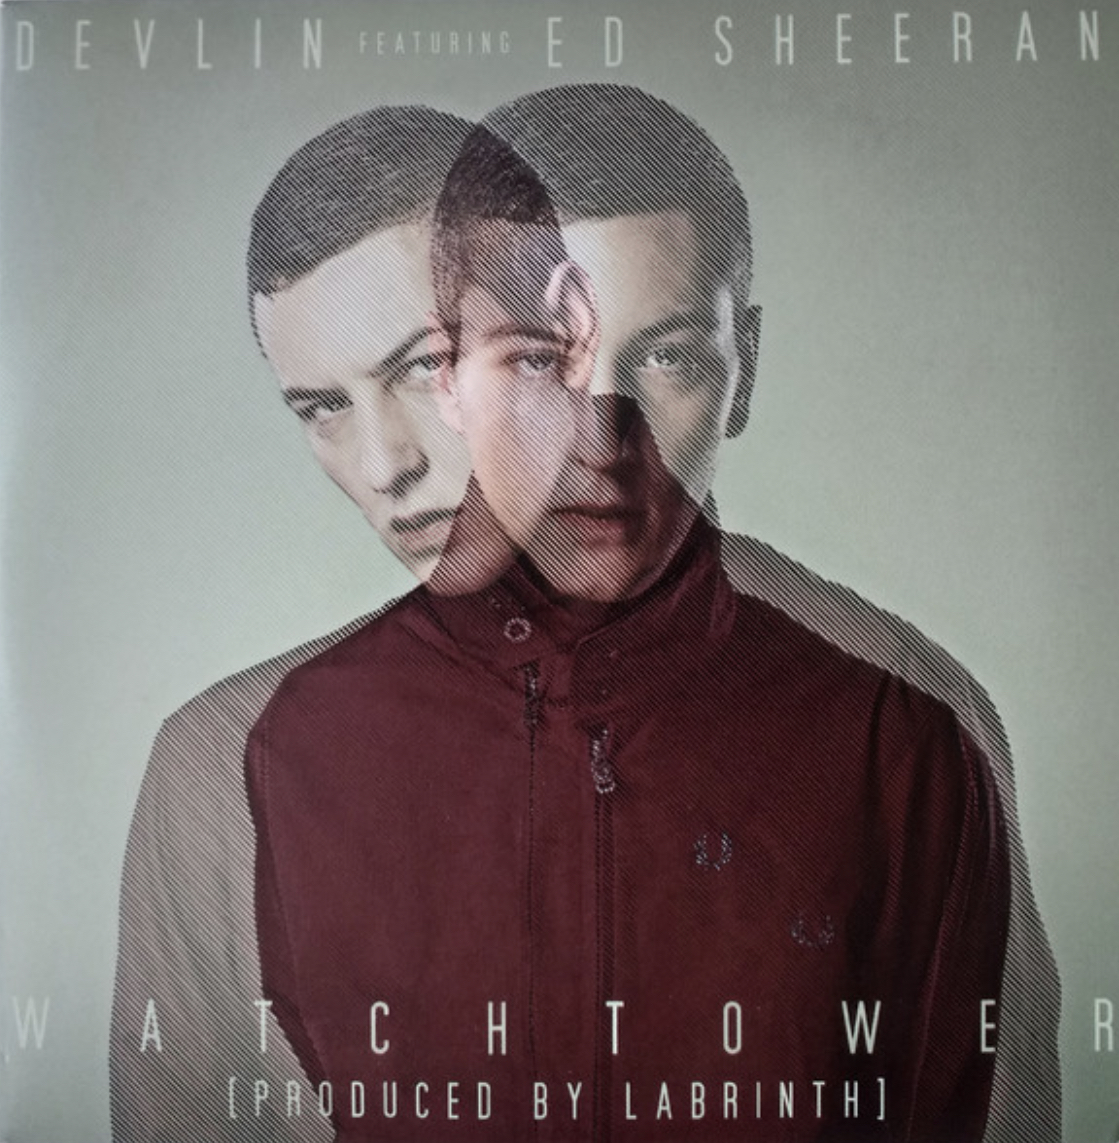 Devlin ft. featuring Ed Sheeran (All Along the) Watchtower cover artwork